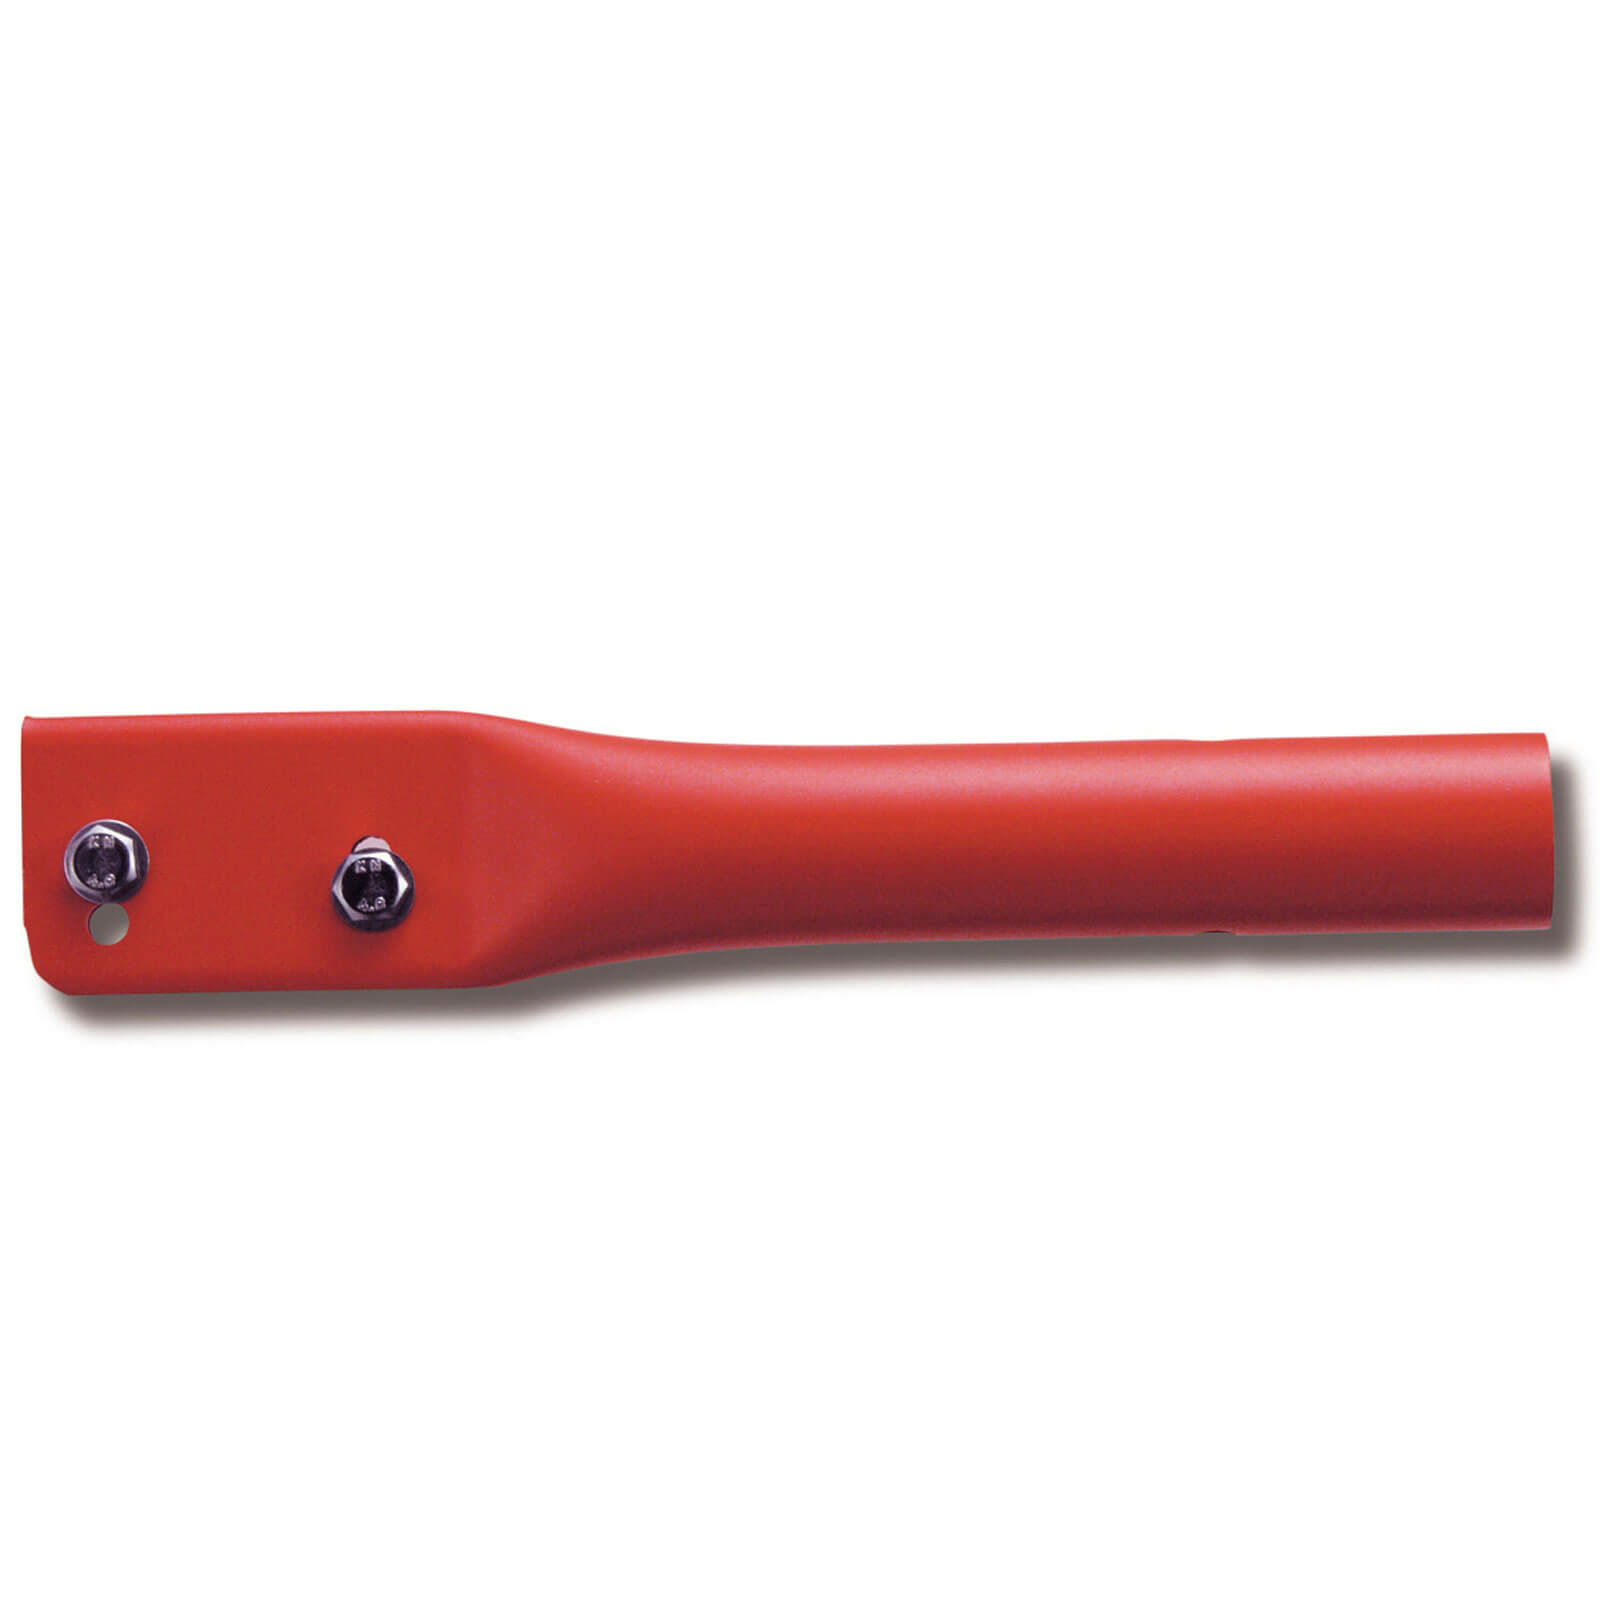 ARS Pole Saw Blade Grip for Round Poles